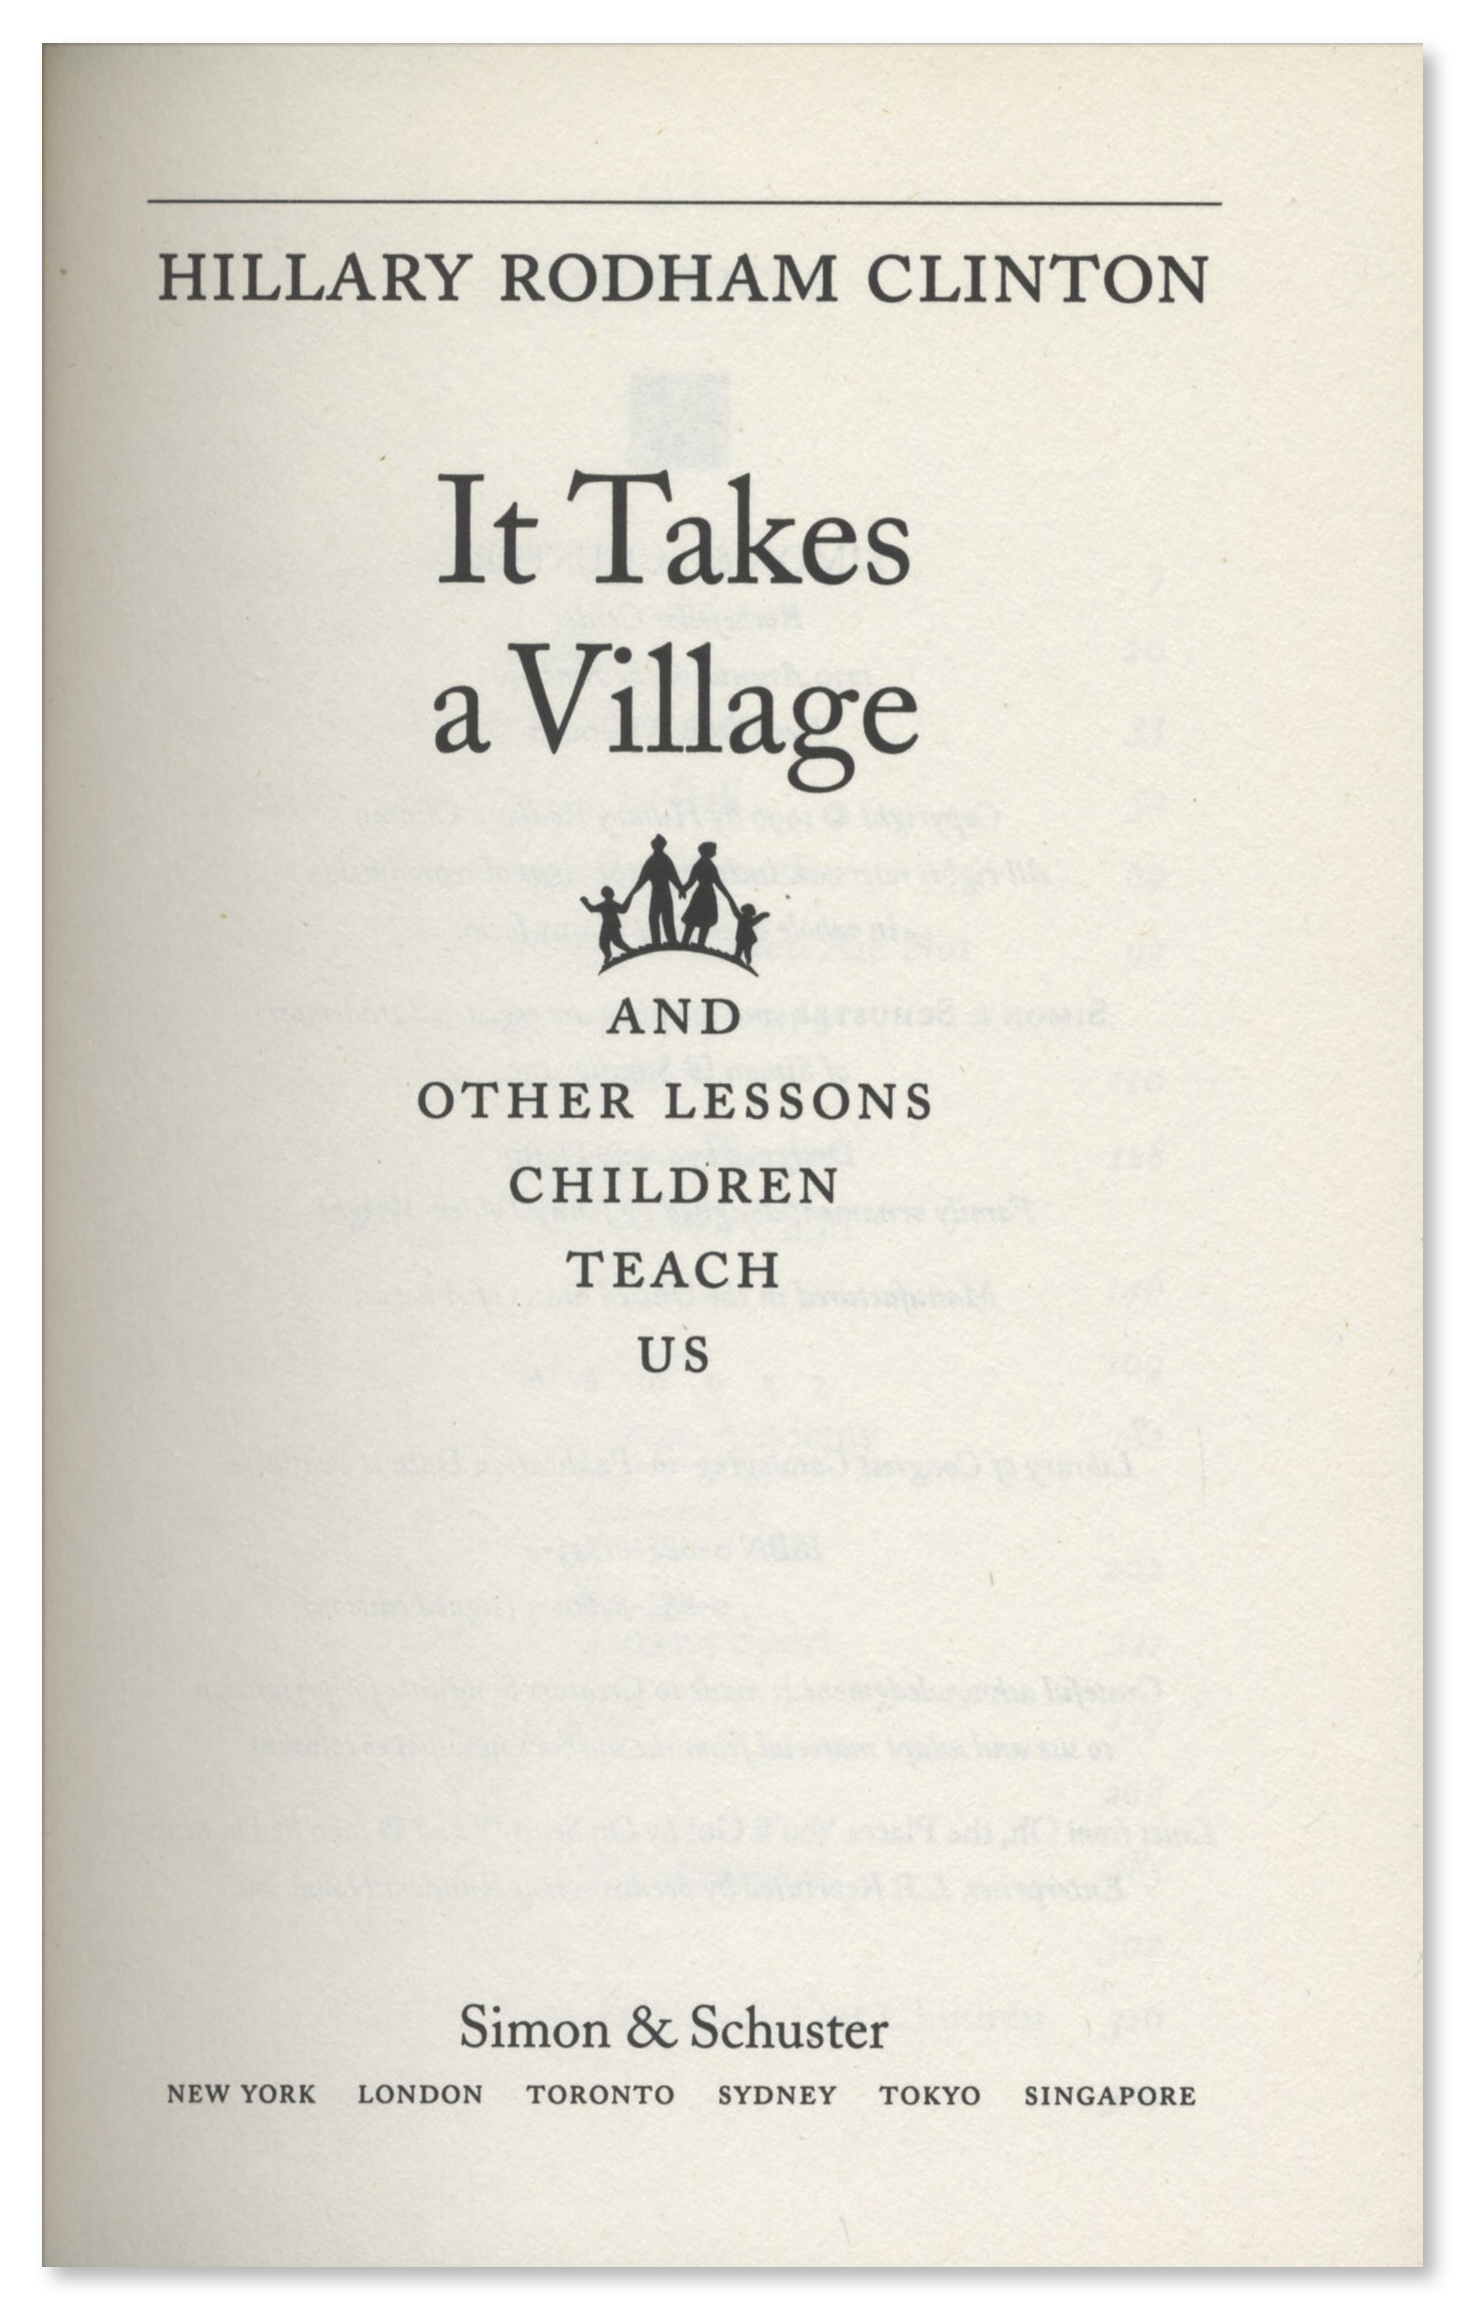 Hillary Clinton Signed ''It Takes a Village'' -- Near Fine Hillary Clinton signed copy of her - Image 3 of 3